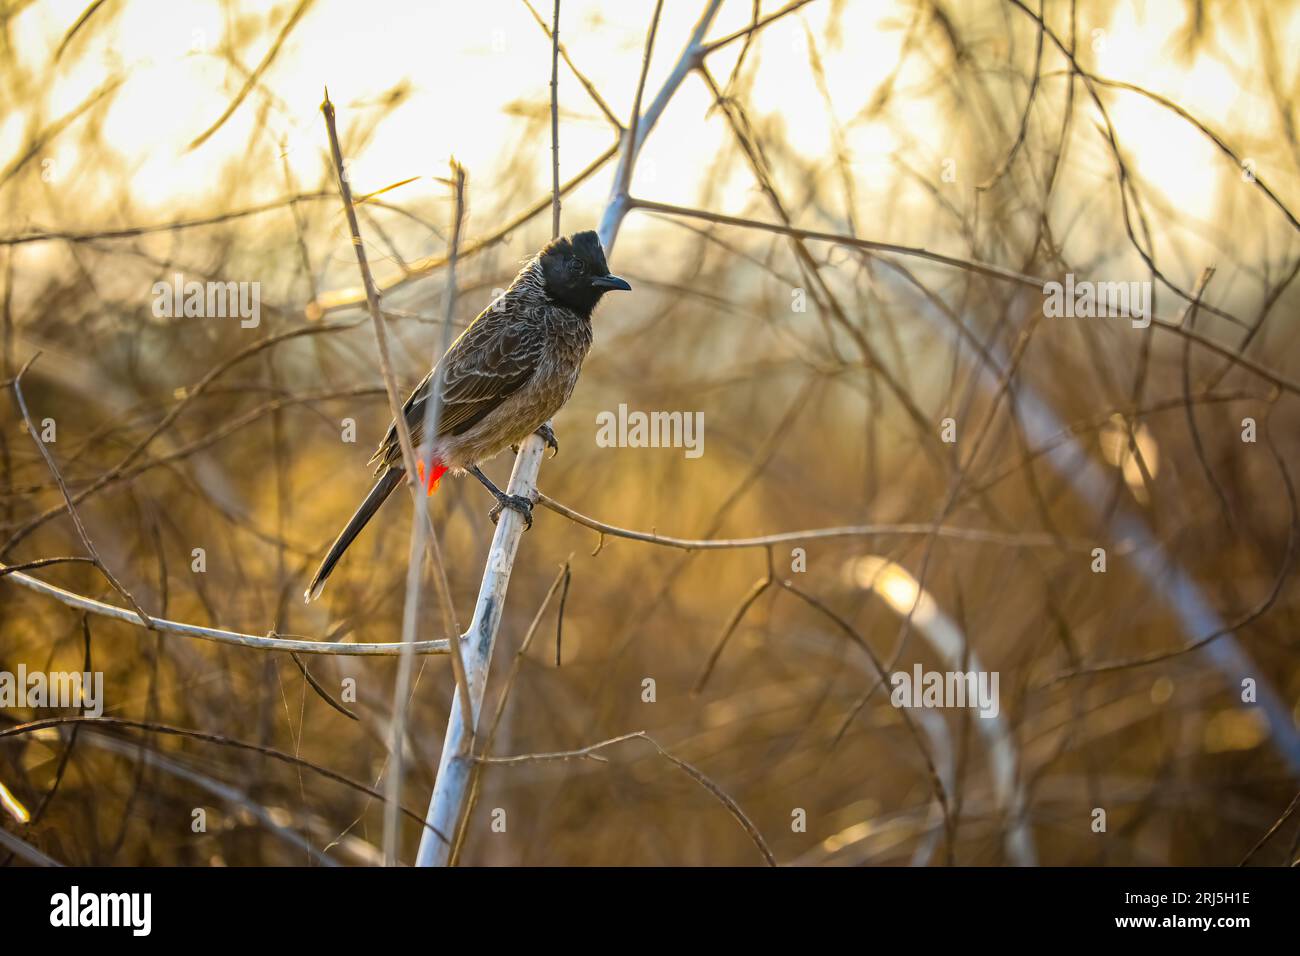 The red-vented bulbul (Pycnonotus cafer) perched on a branch Stock Photo